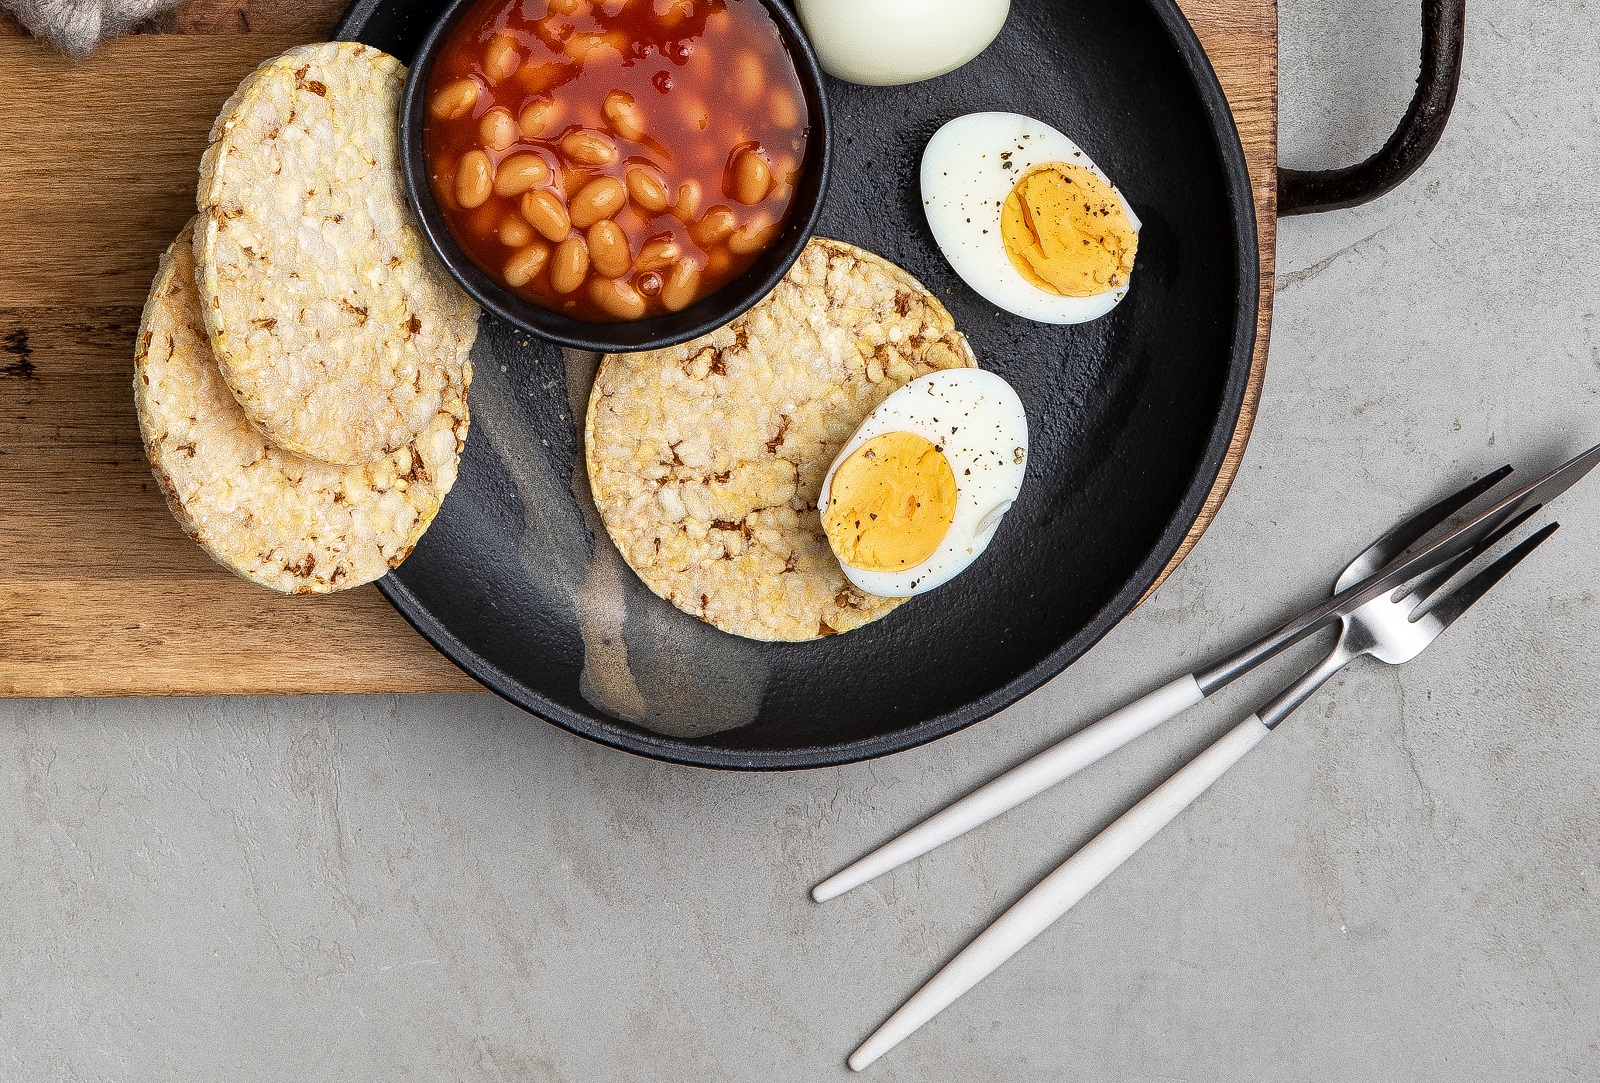 CORN THINS Slices with Beans & Egg for breakfast